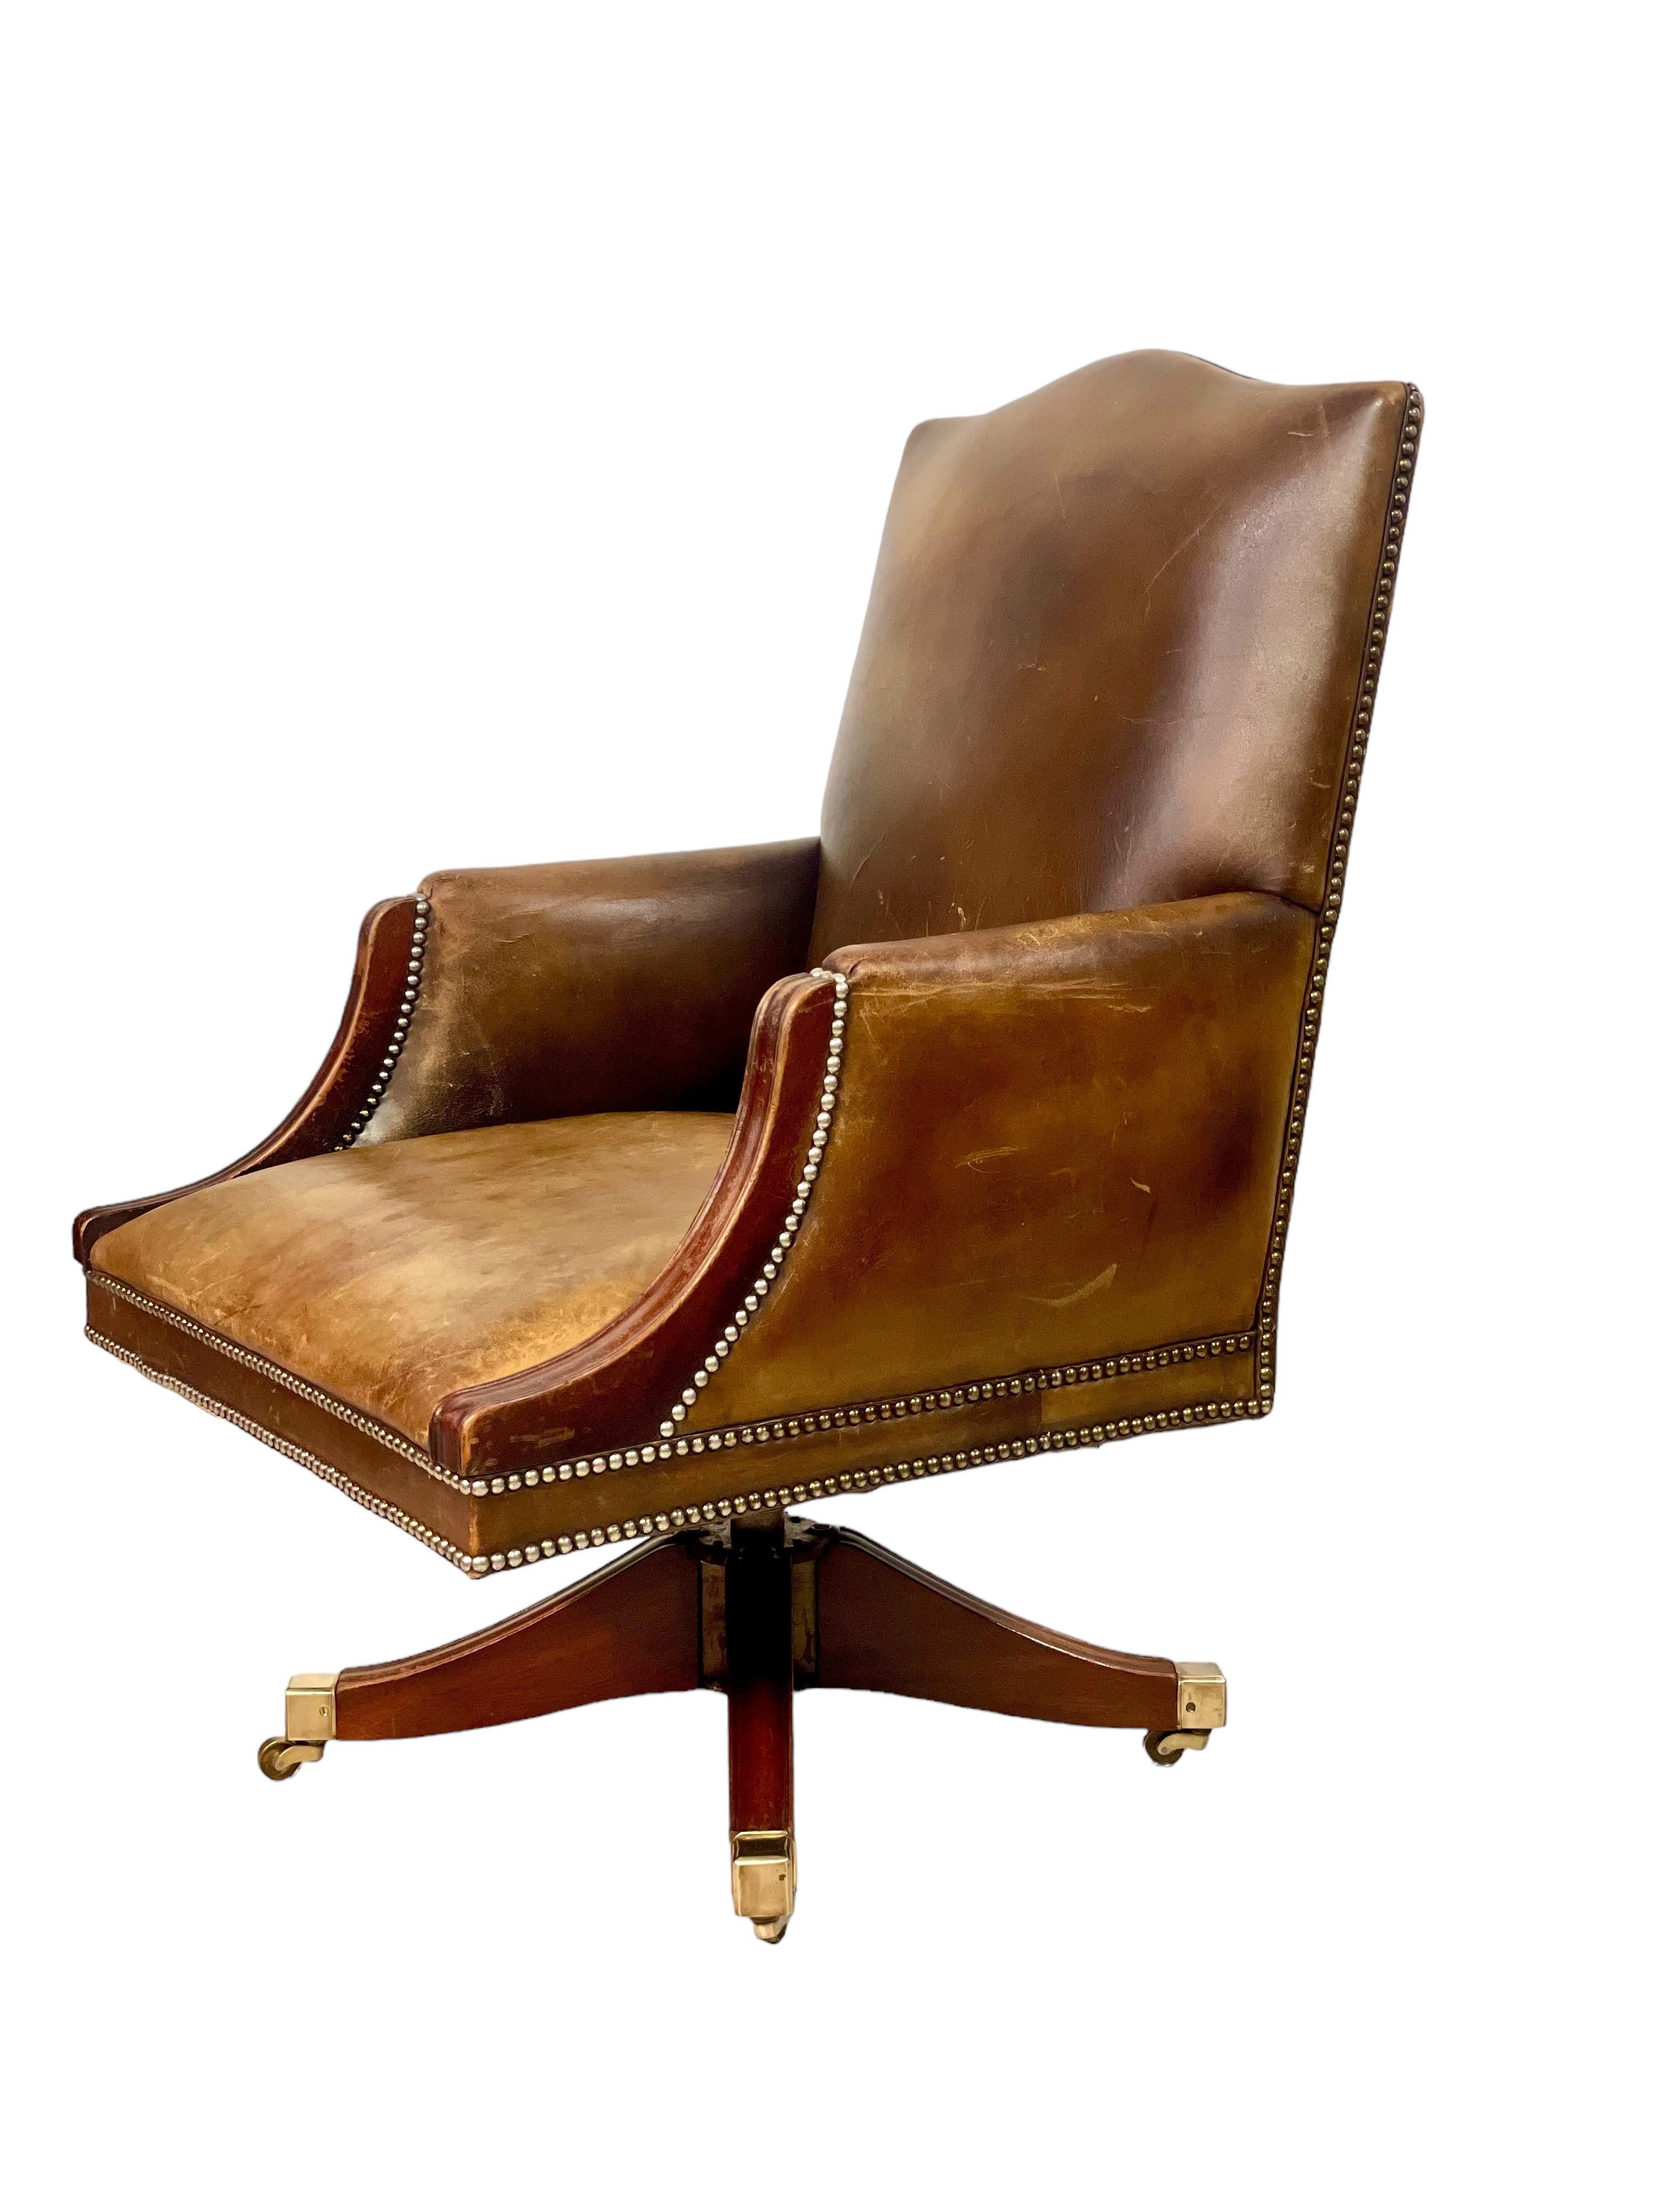 A superb and very handsome revolving leather director's chair with a high back and comfortably wide, padded seat. The arm rests are shaped and enclosed, and the leatherwork nicely aged and full of timeworn character, and accented with brass nailhead